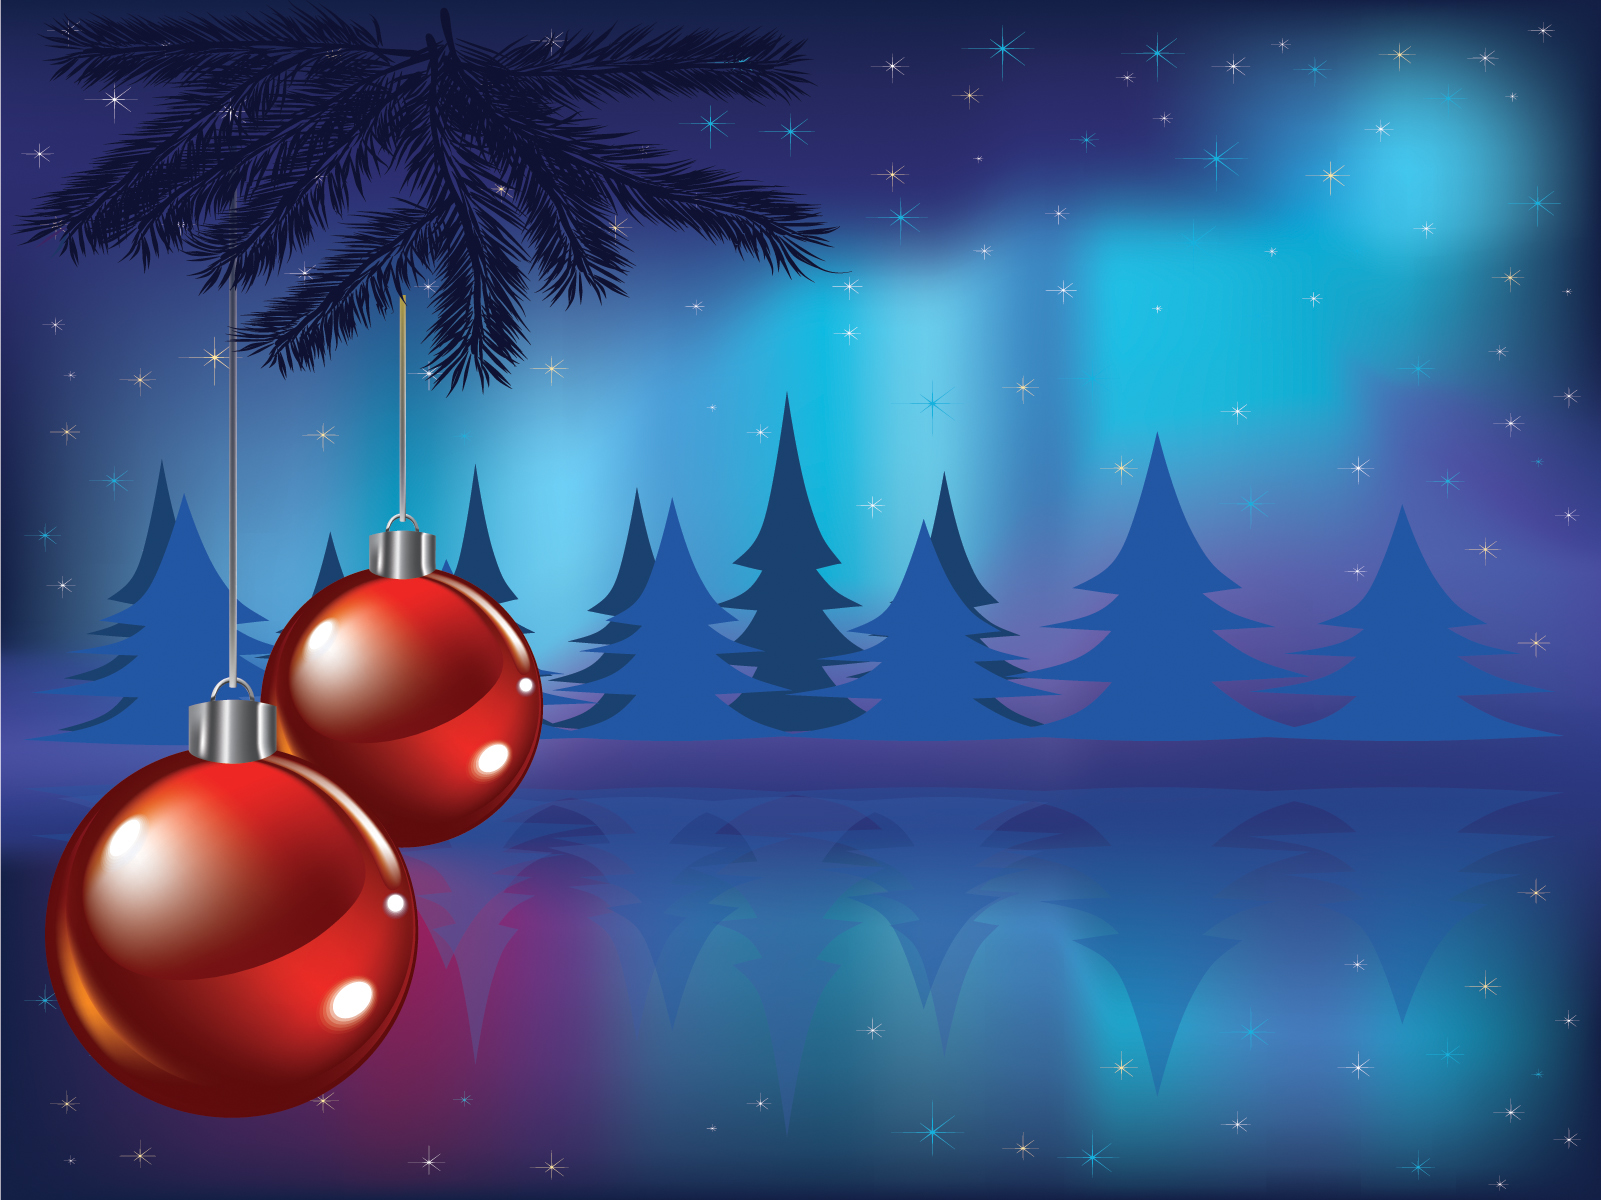 Microsoft Powerpoint Christmas Backgrounds